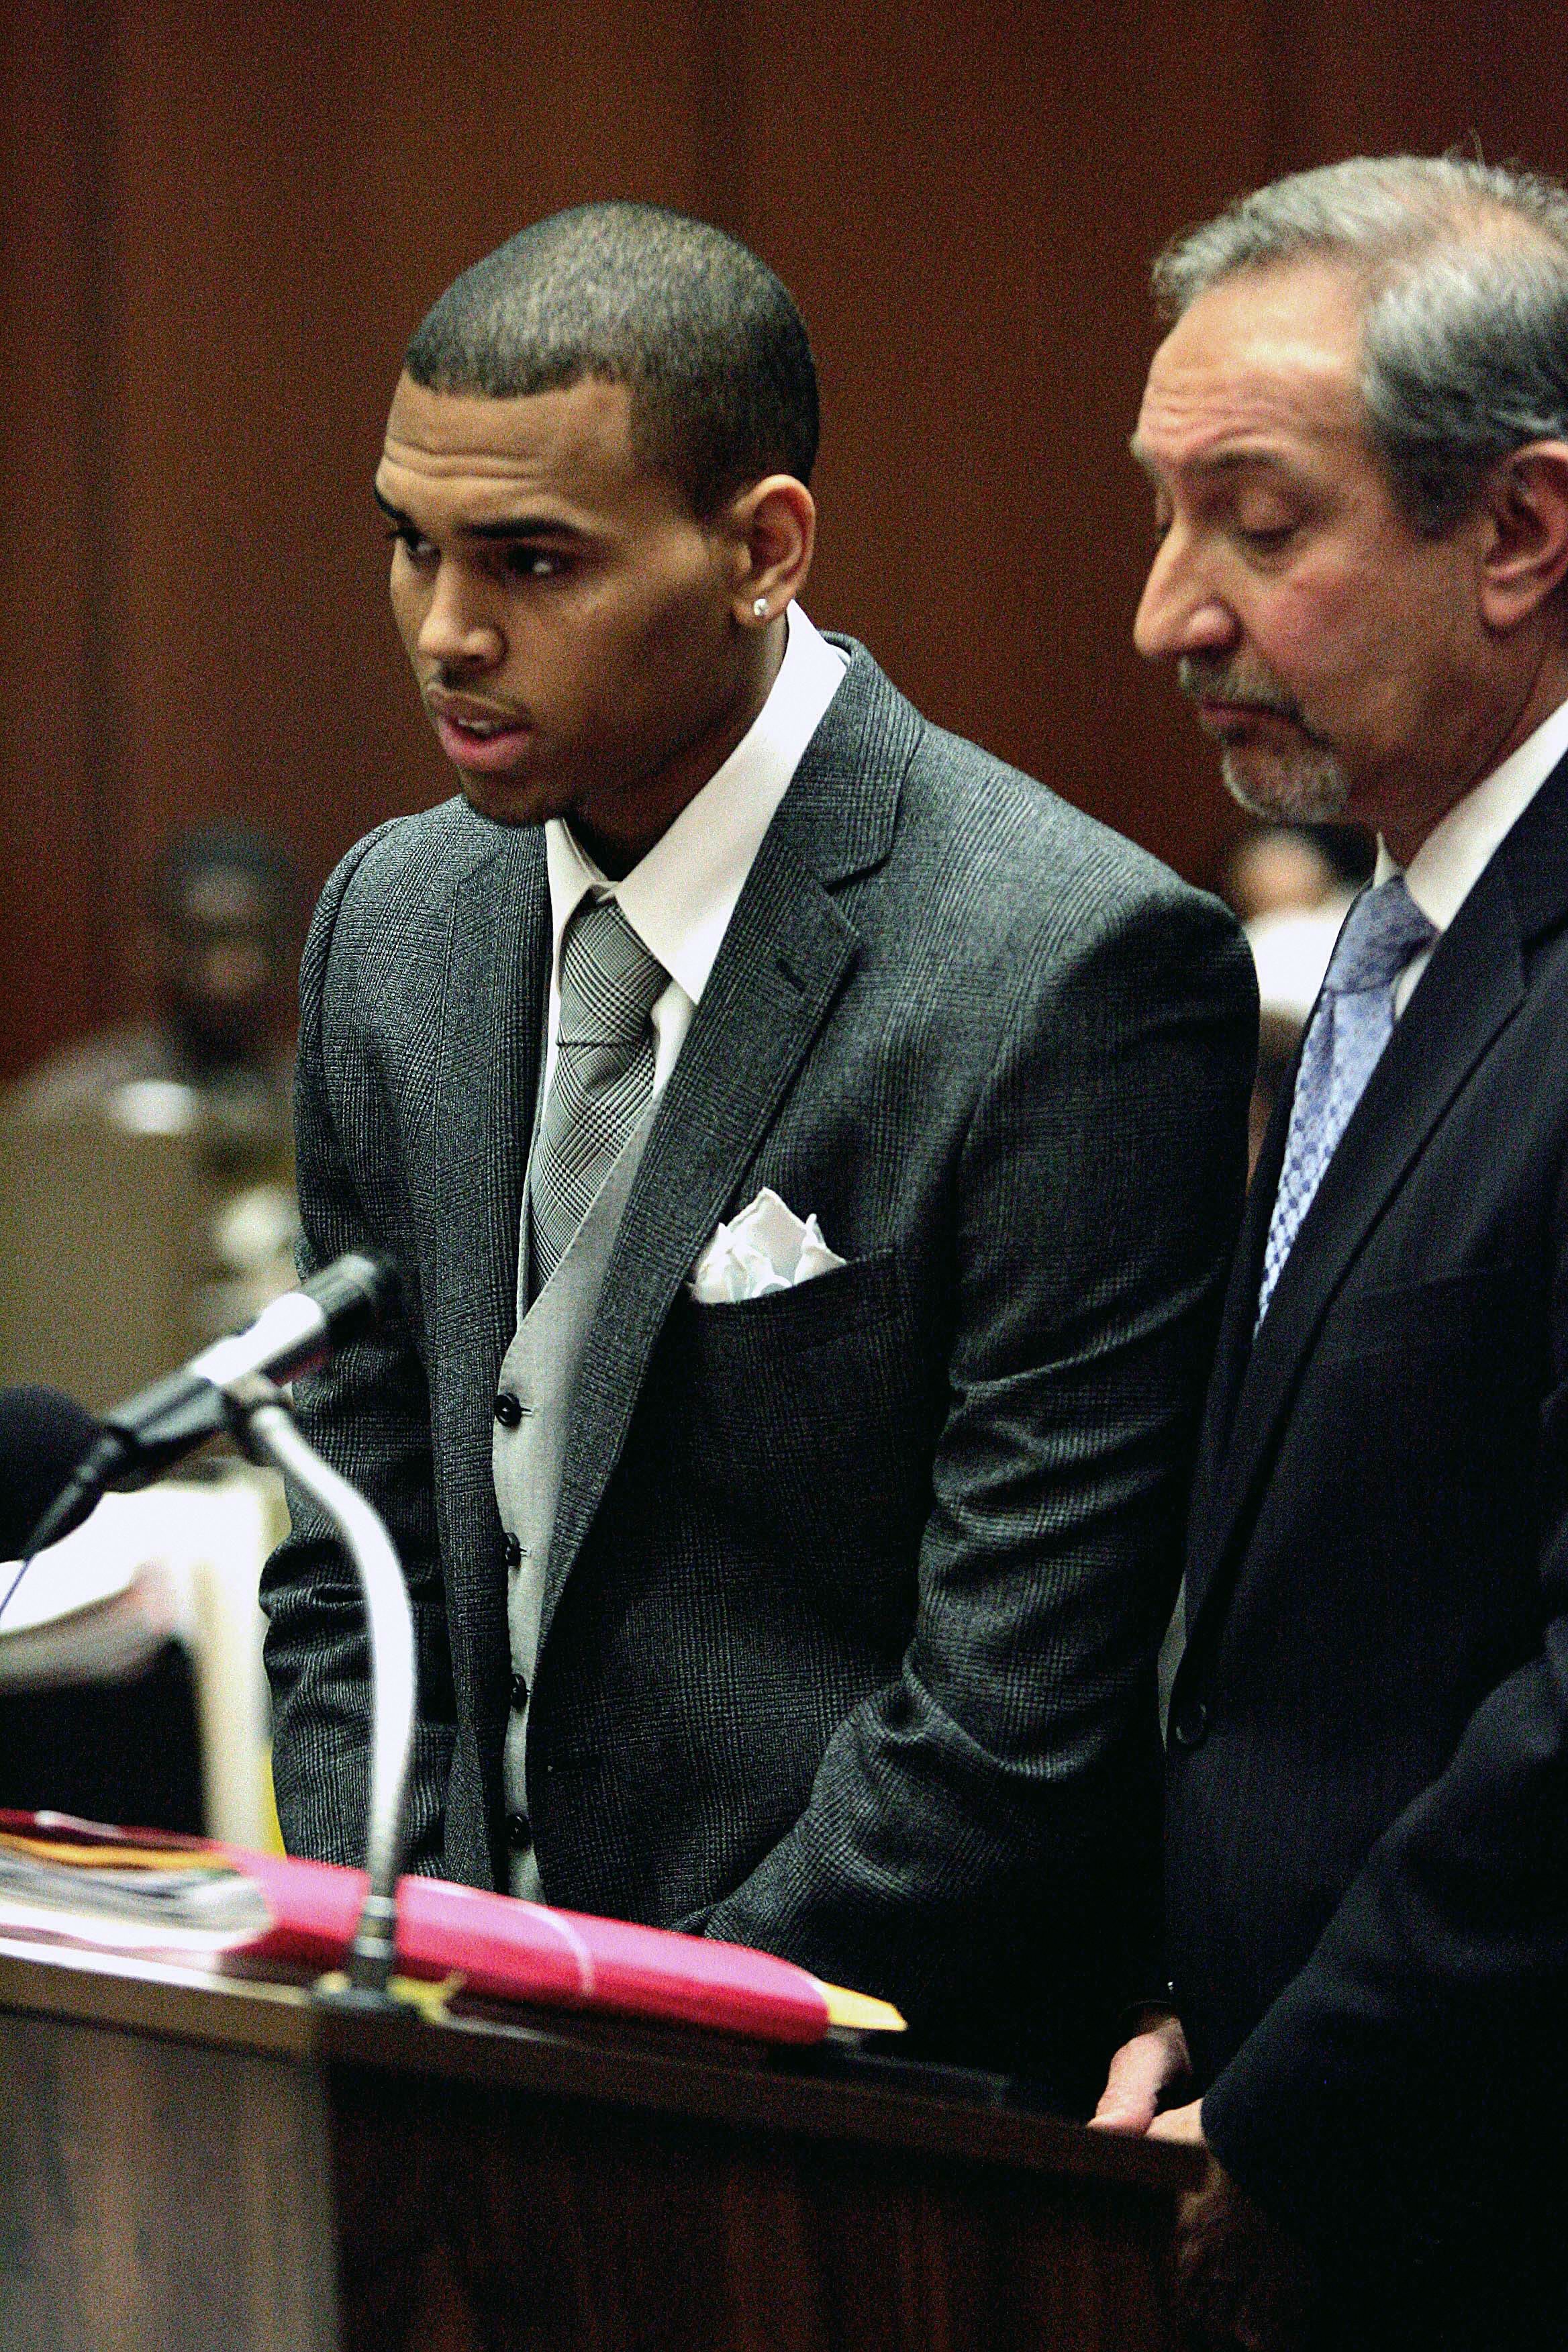 Chris Brown Is Cool About Rihanna Rumors: Photo 1187101